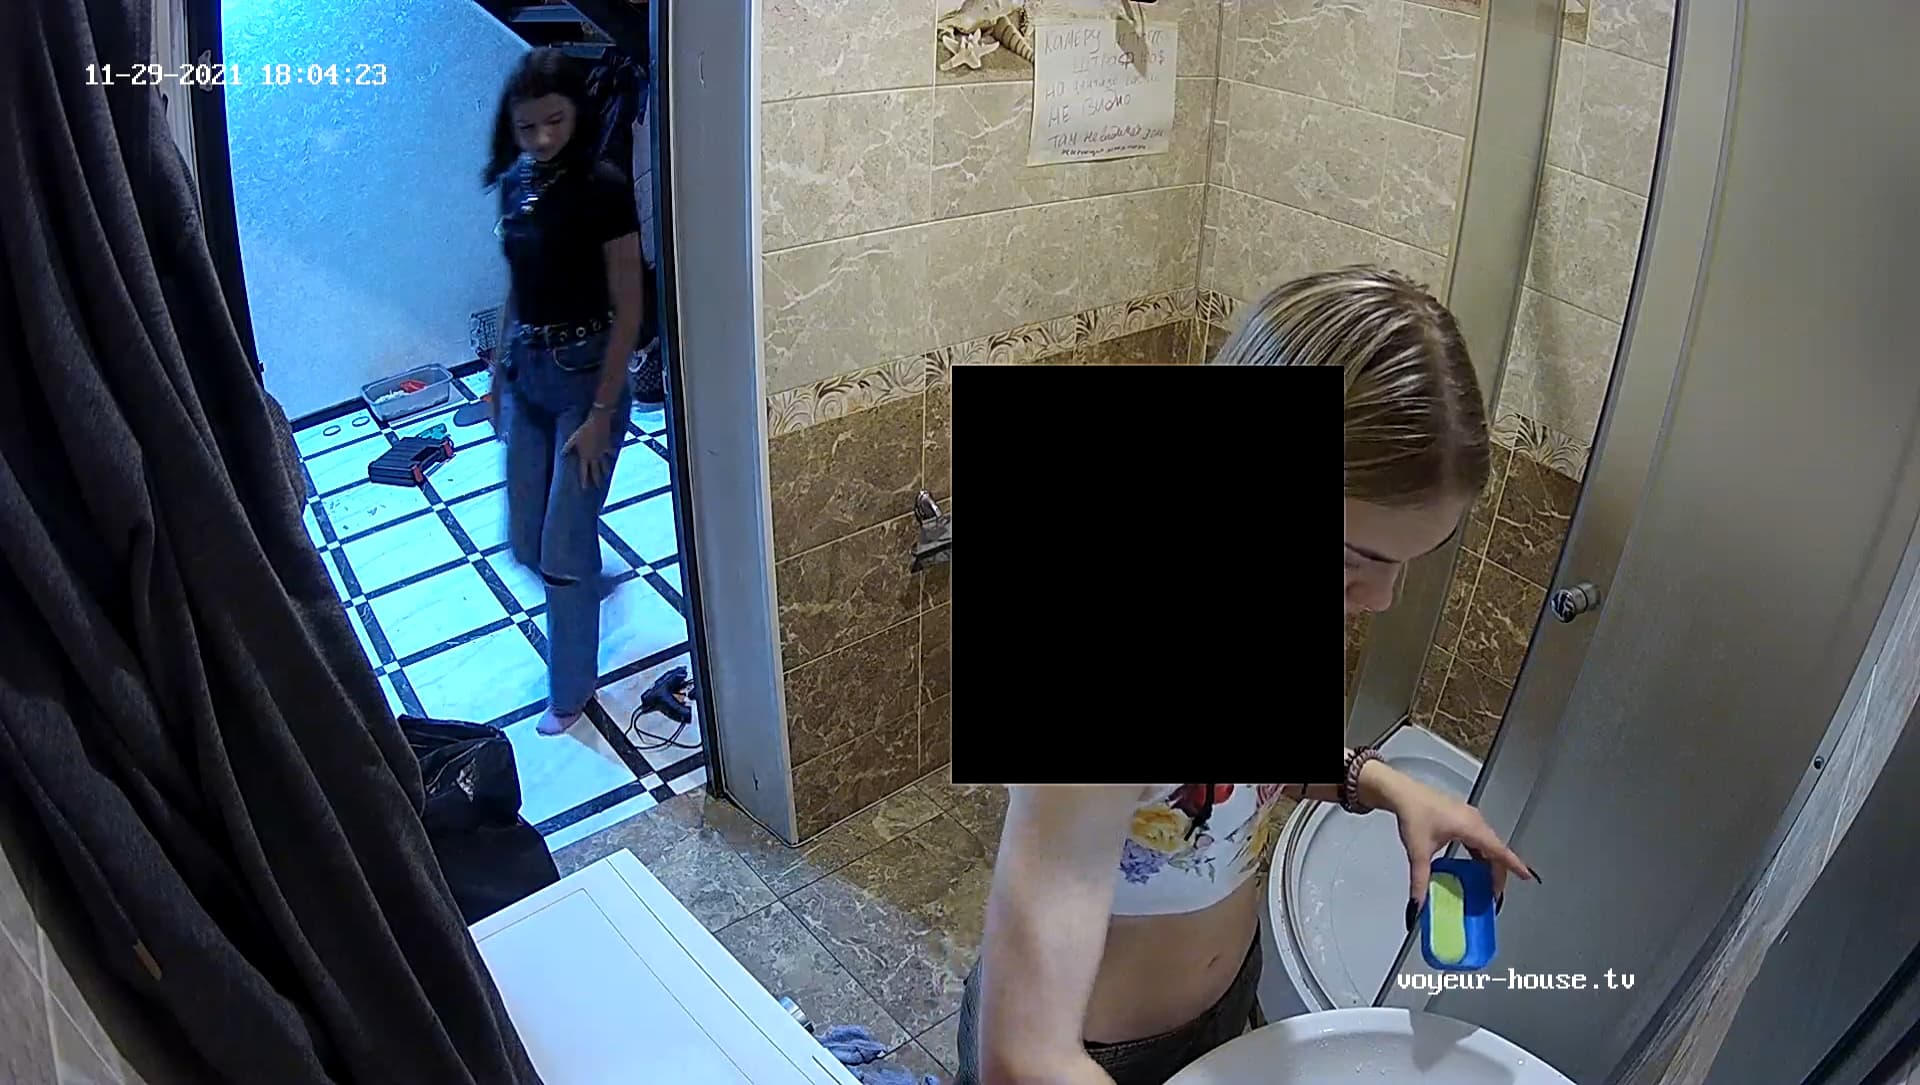 Should toilet cams be banned? - Your Feedback and Ideas pic pic photo